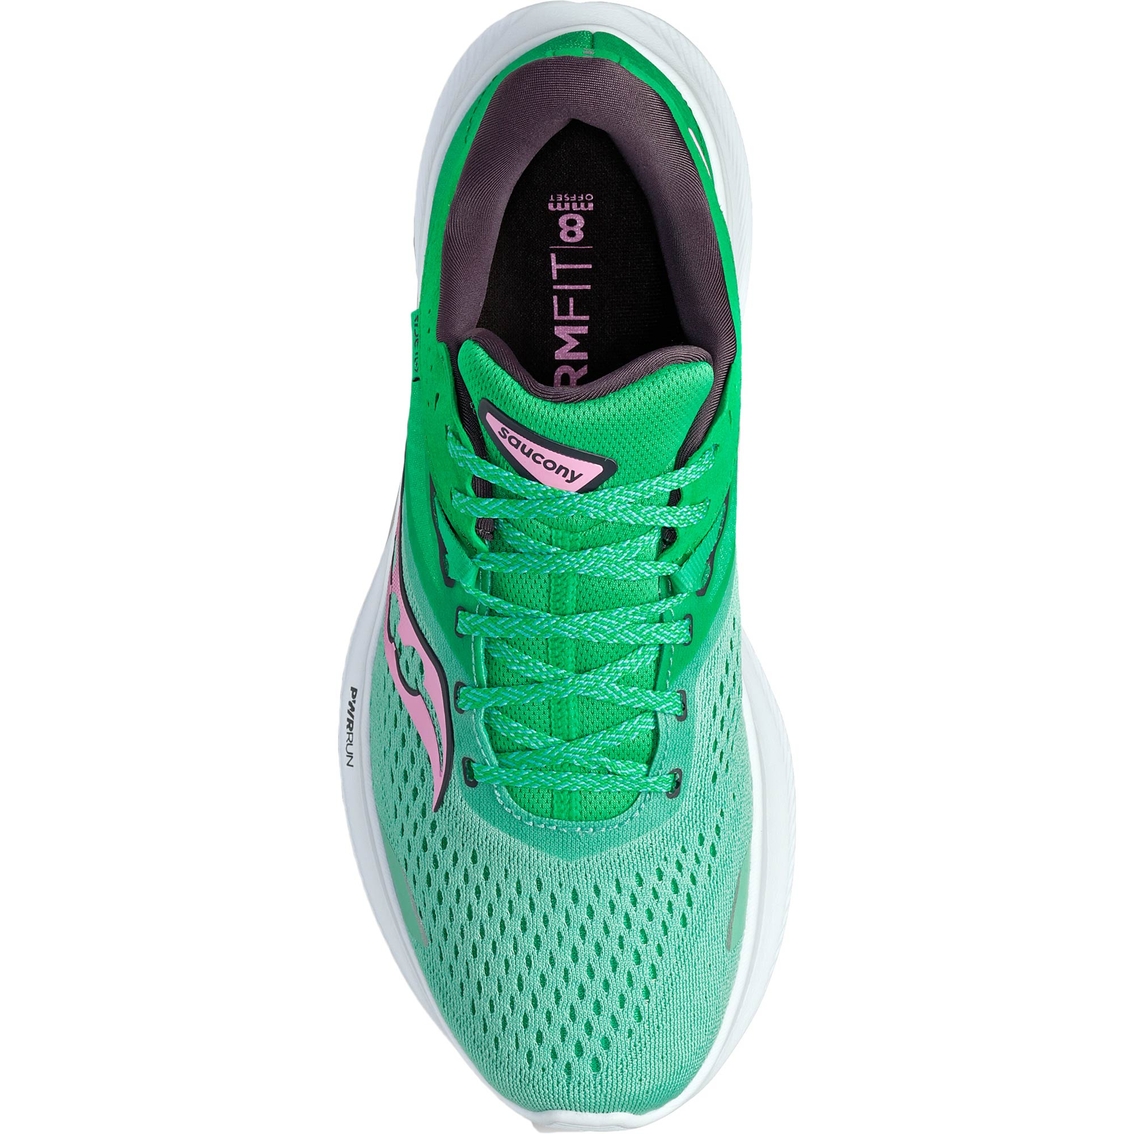 Saucony Women's Ride 16 Running Shoes - Image 4 of 5